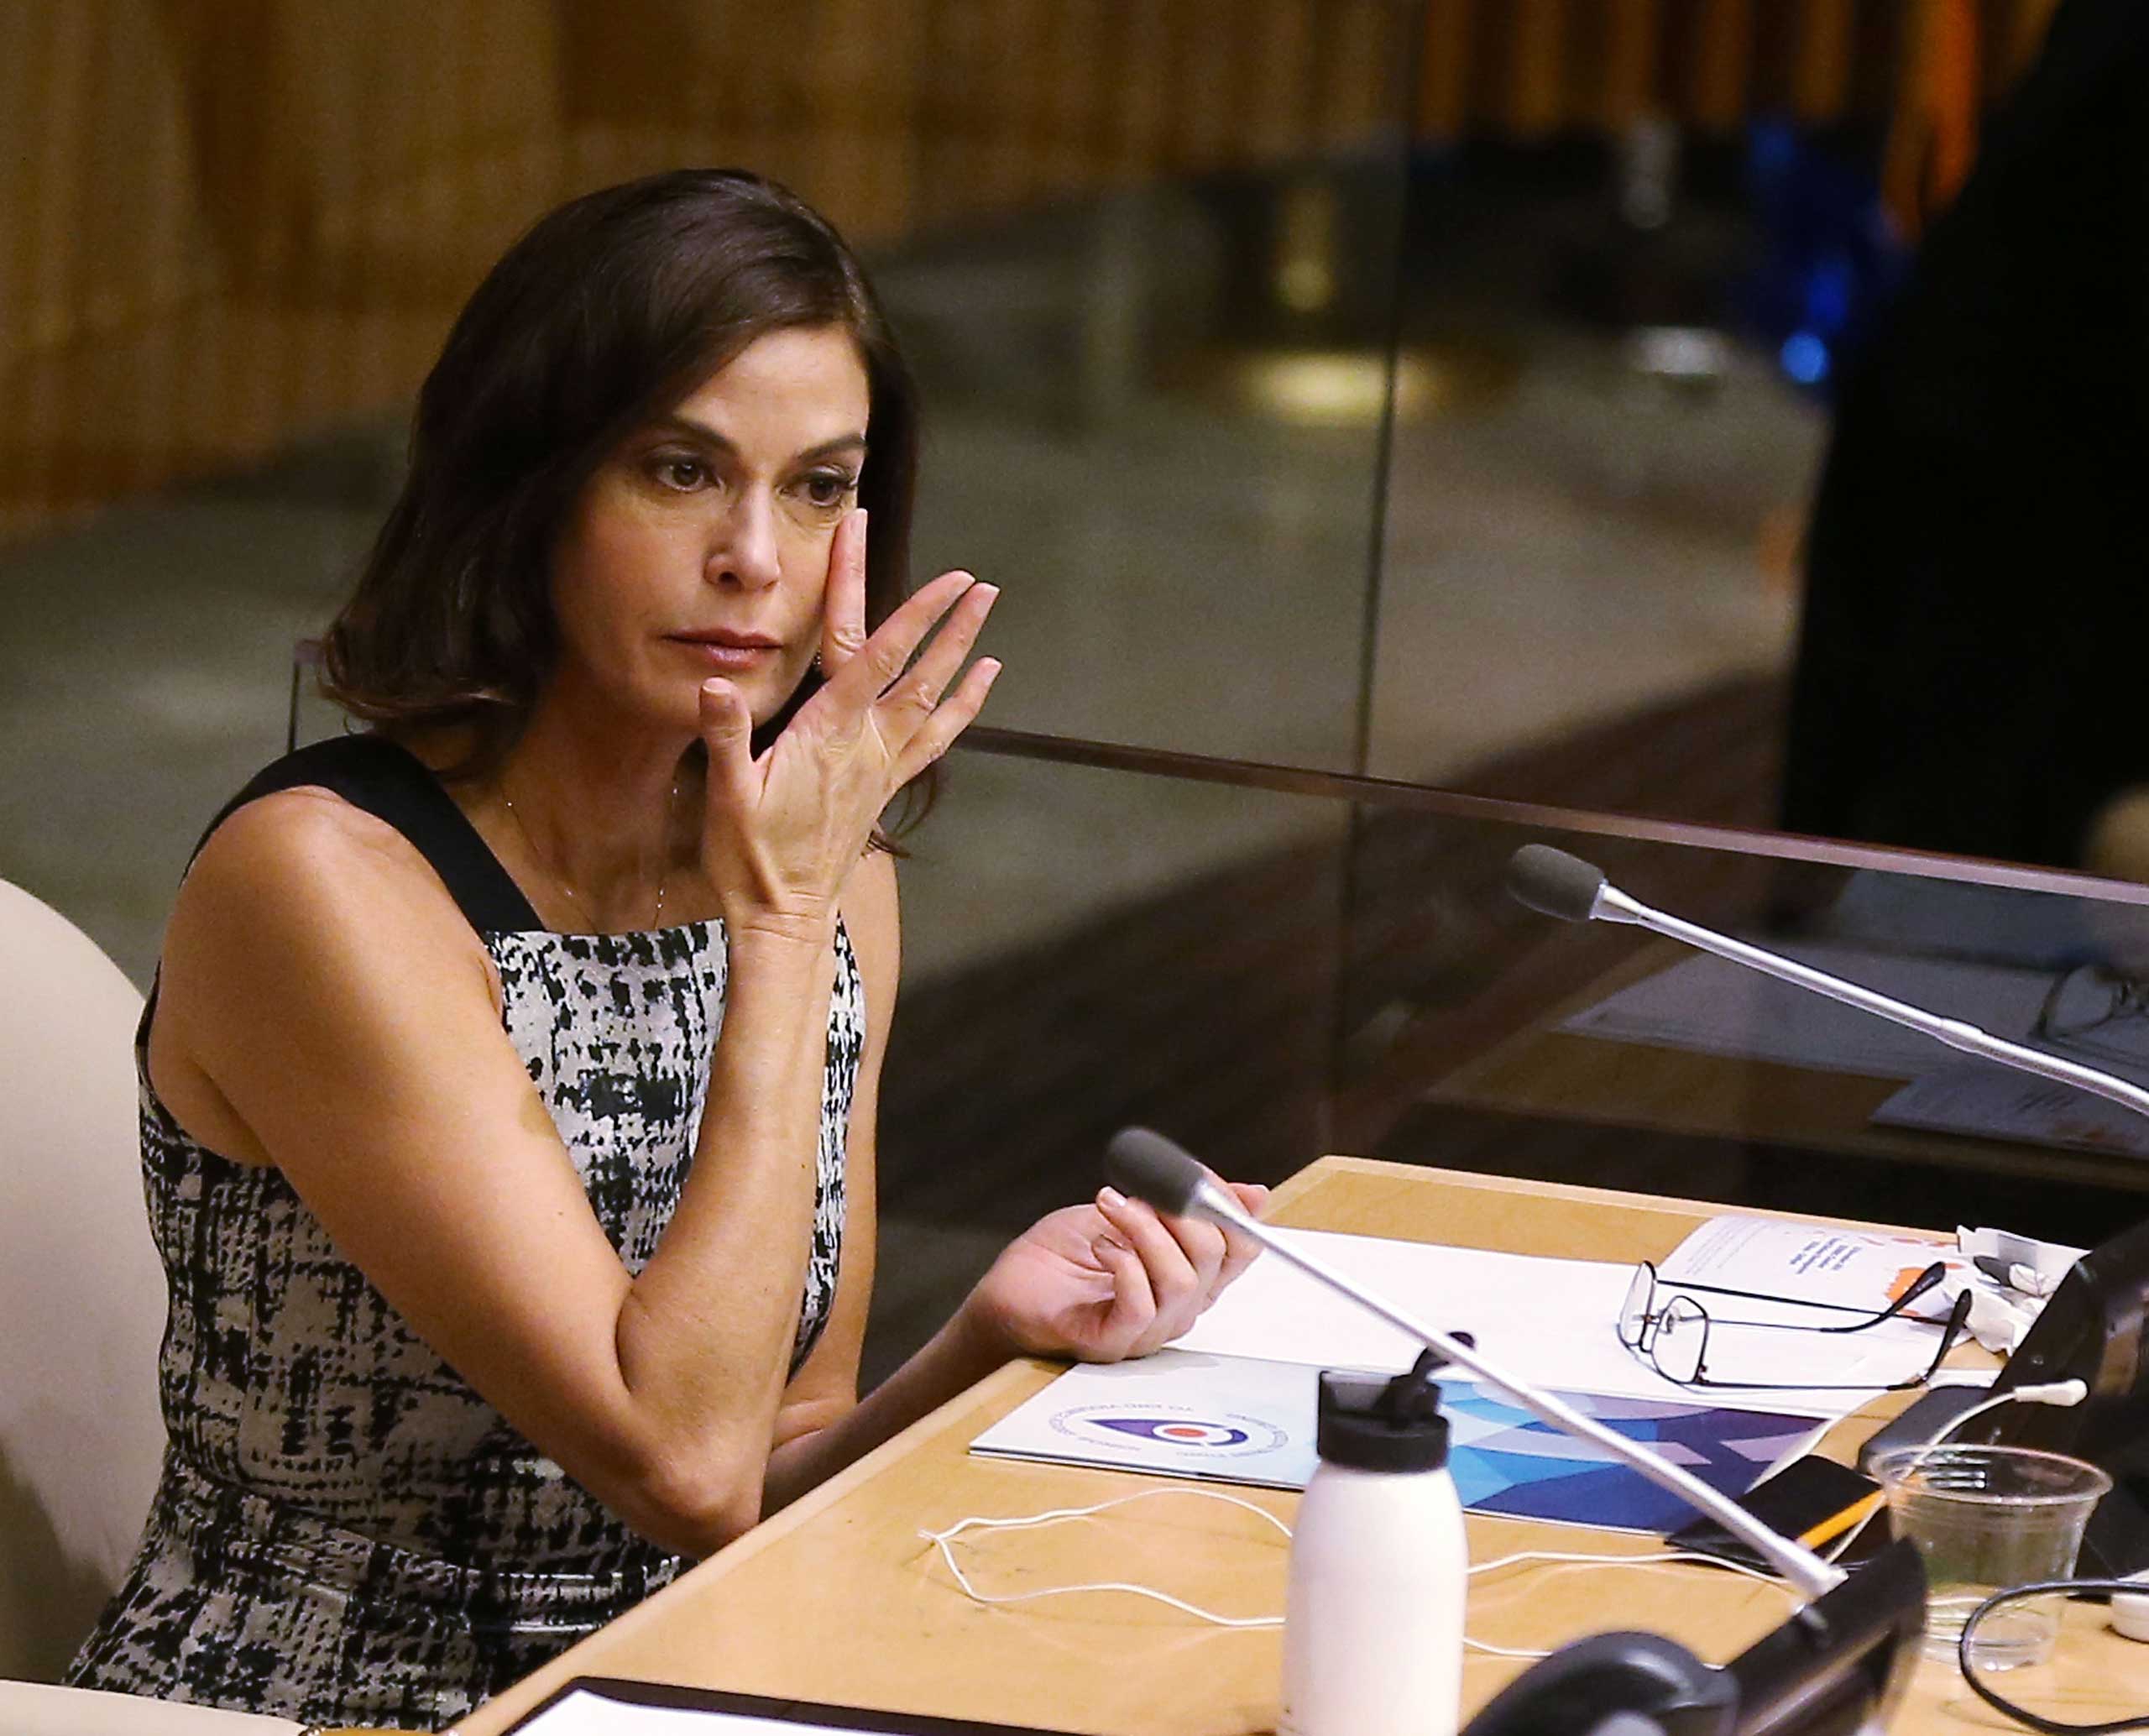 Actress Teri Hatcher wipes away tears after her speech during the United Nations Official Commemoration of the International Day For The Elimination Of Violence Against Women on Nov. 25, 2014 in New York. (Jemal Countess—Getty Images)